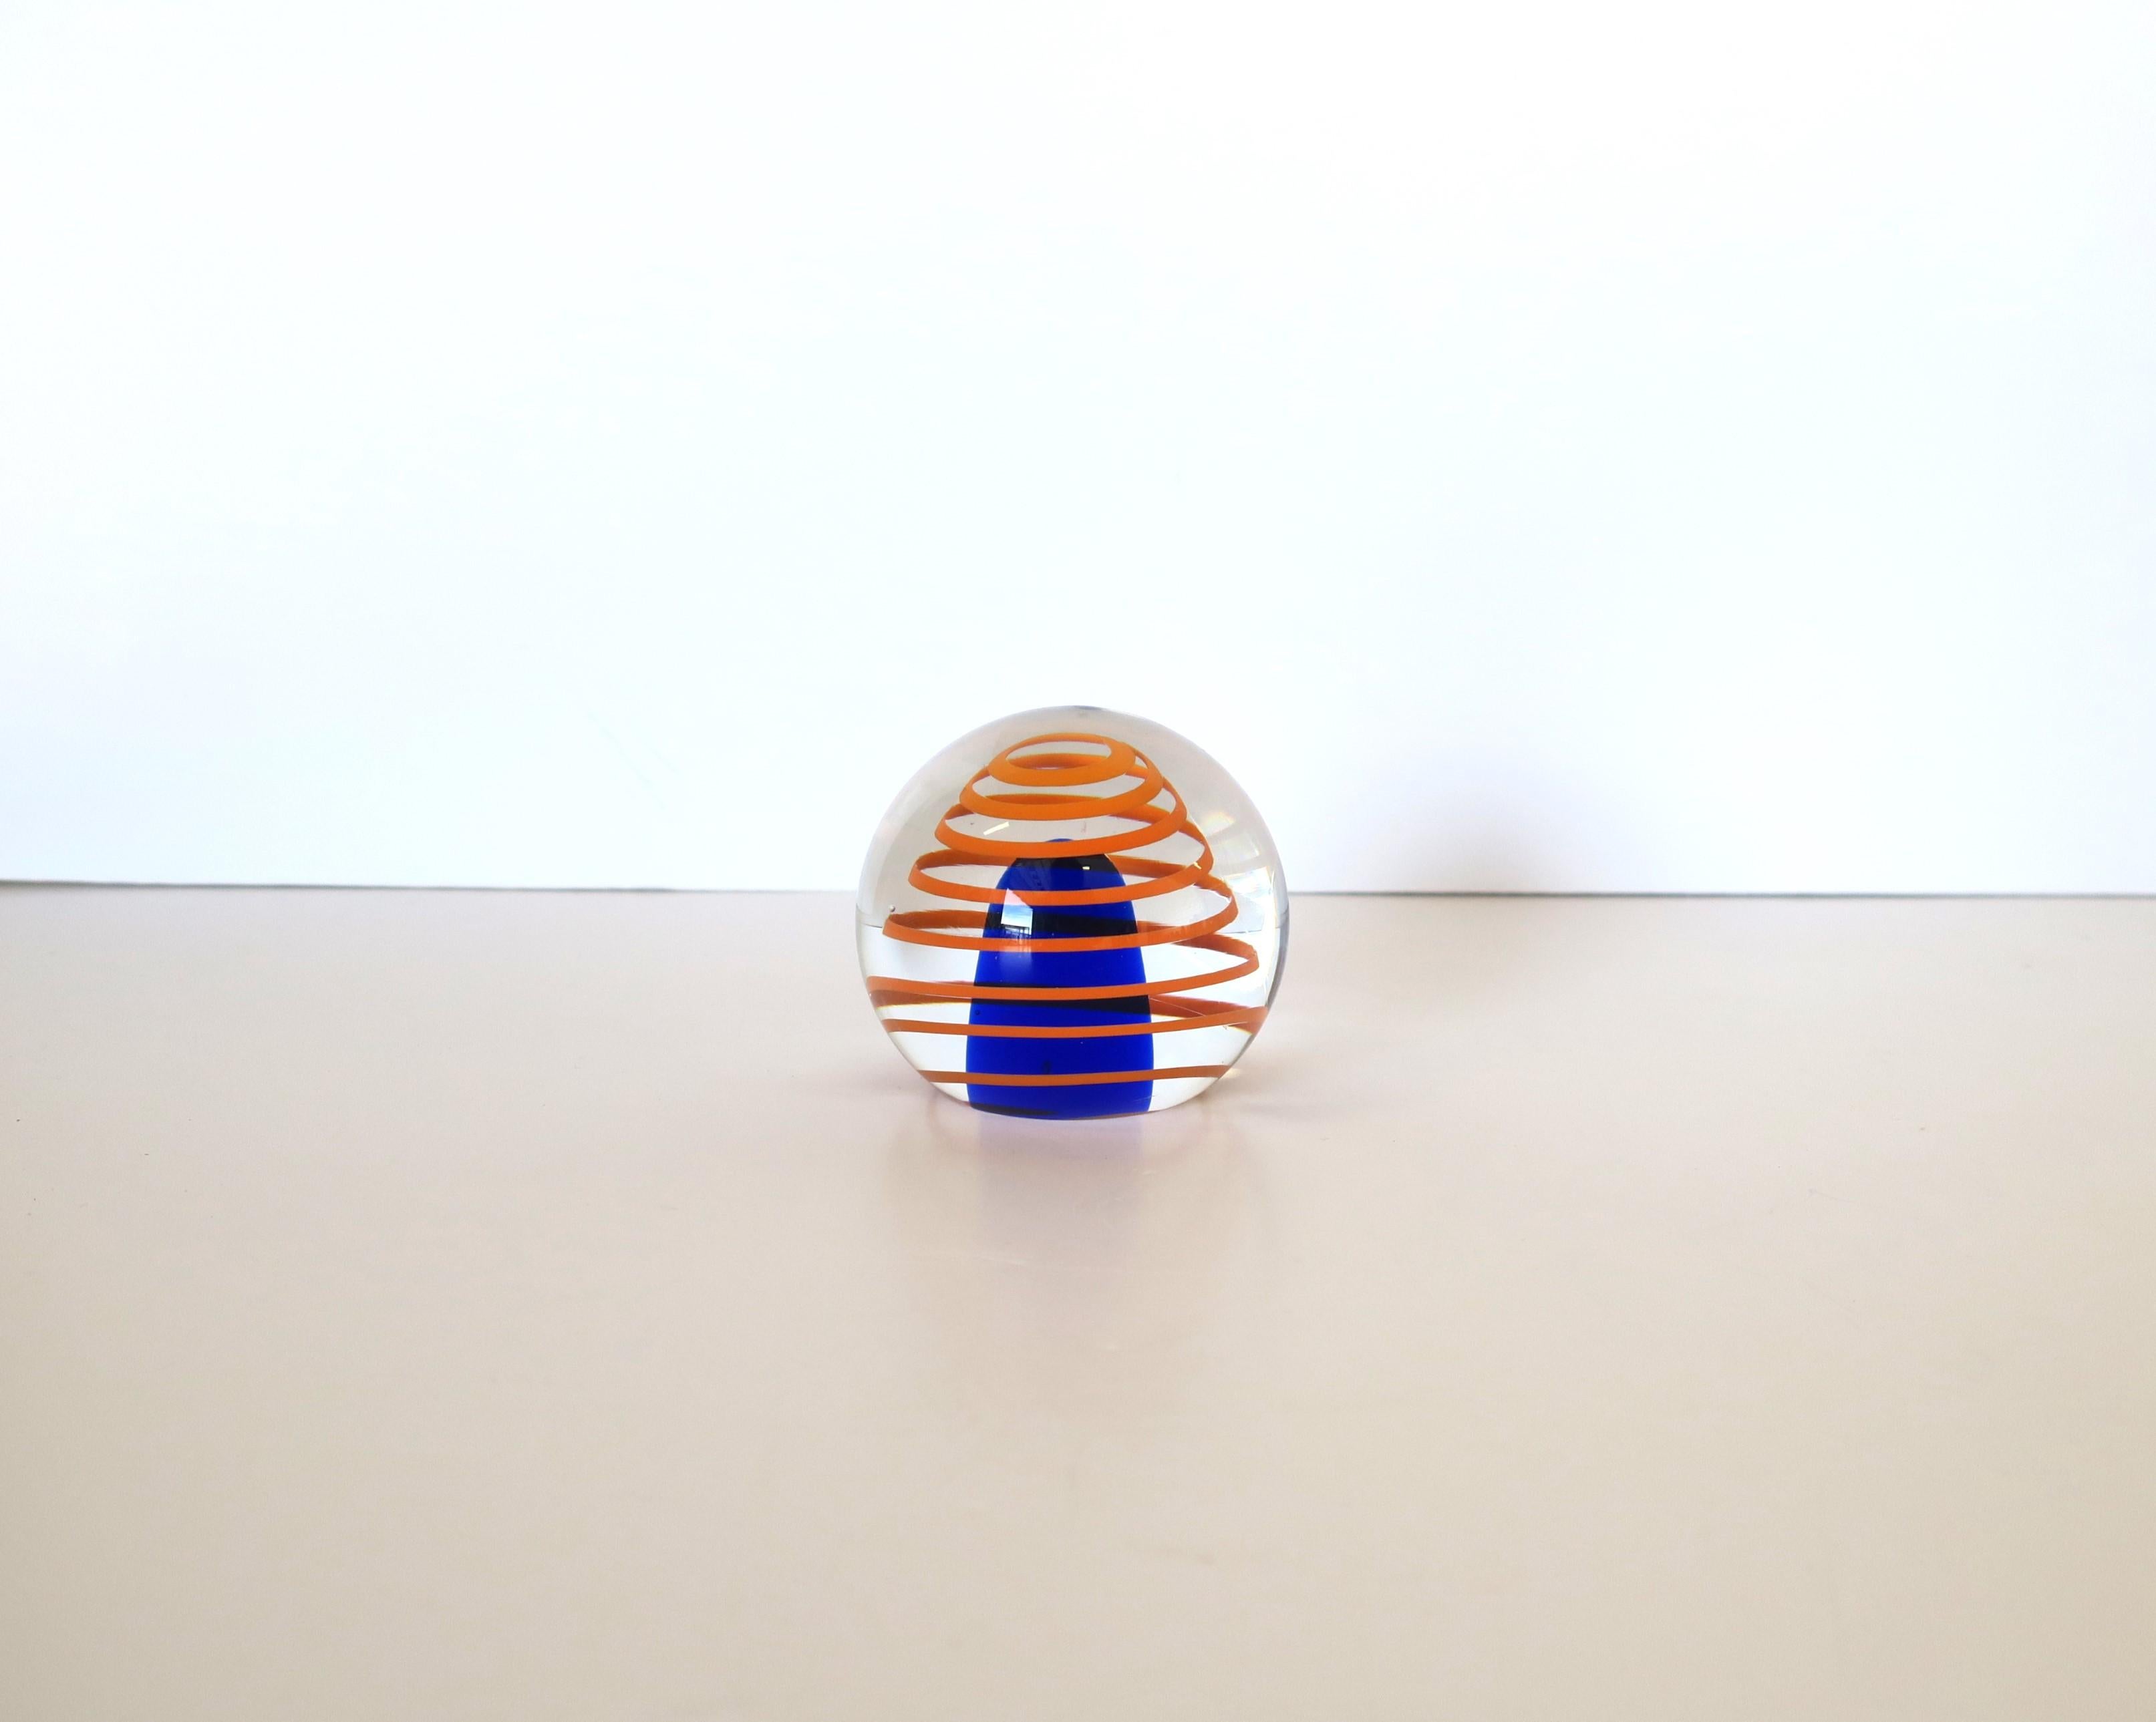 A very beautiful orange and blue art glass paperweight decorative object by Beránek Glassworks, circa Mid-20th Century, Czechoslovakia. Marker's mark etched on bottom as shown in last image. Dimensions: 2.25